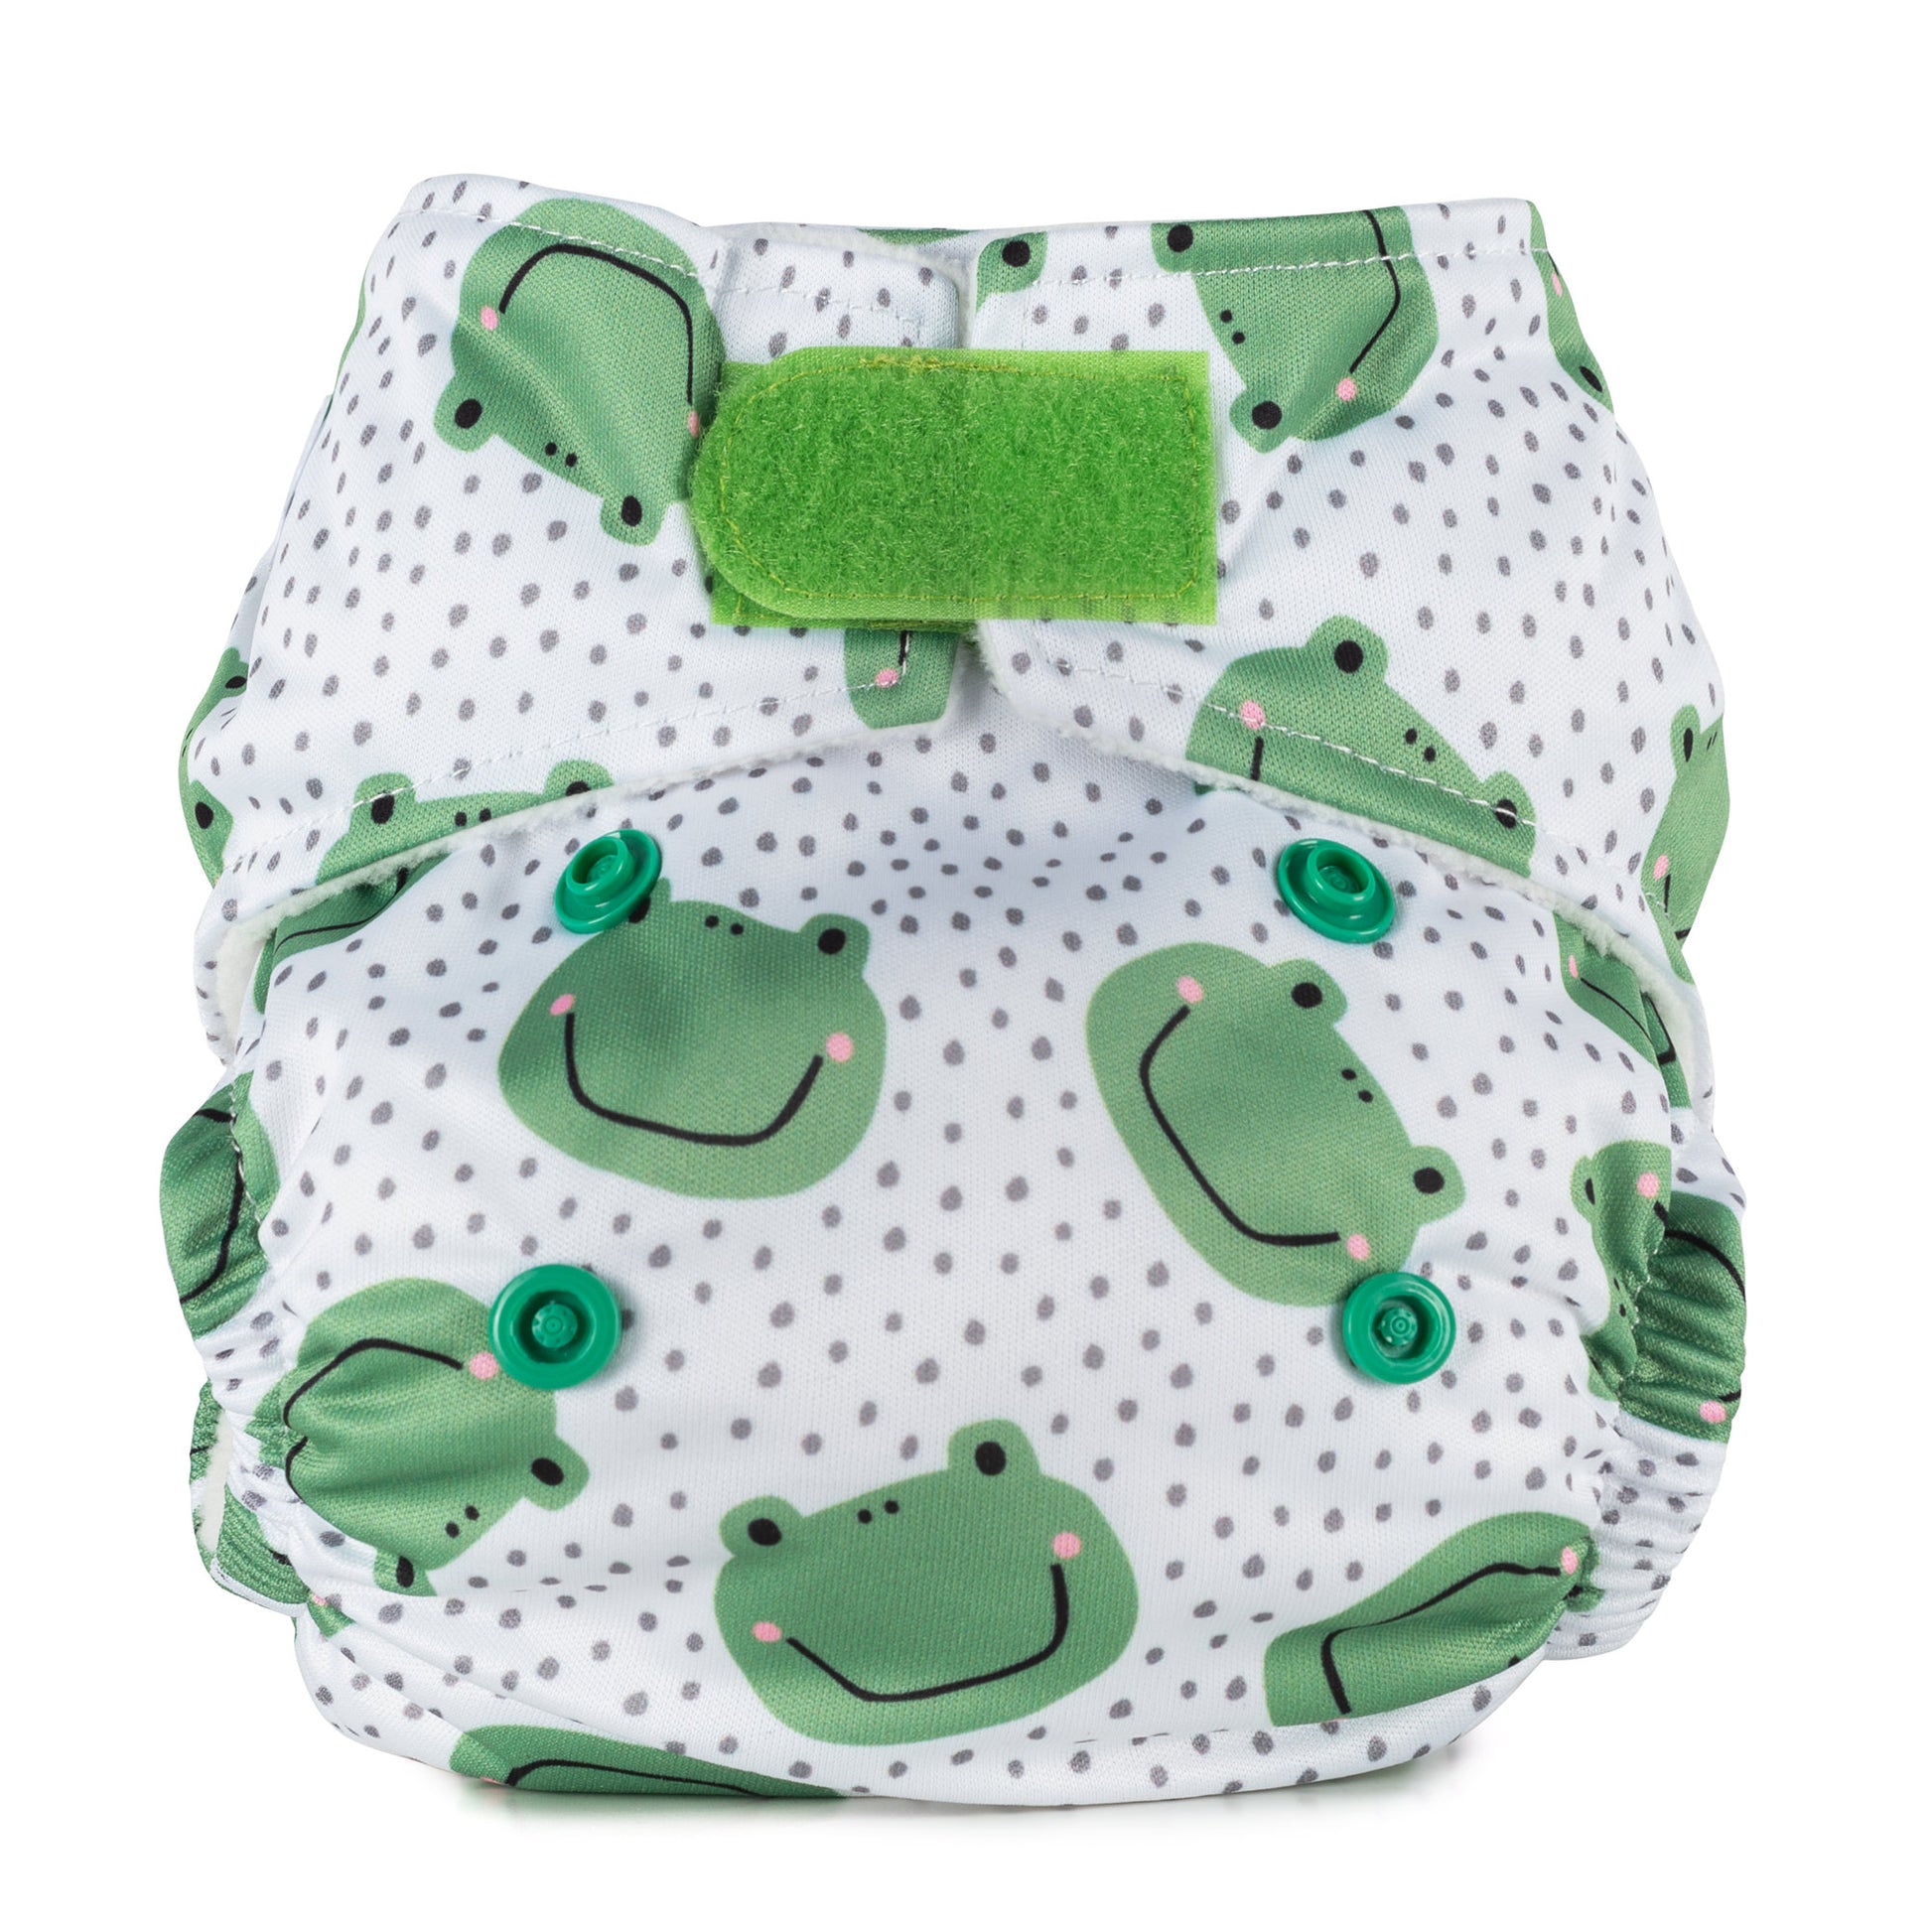 A newborn size reusable cloth nappy with a white background, green frog pattern and velcro fastening. 